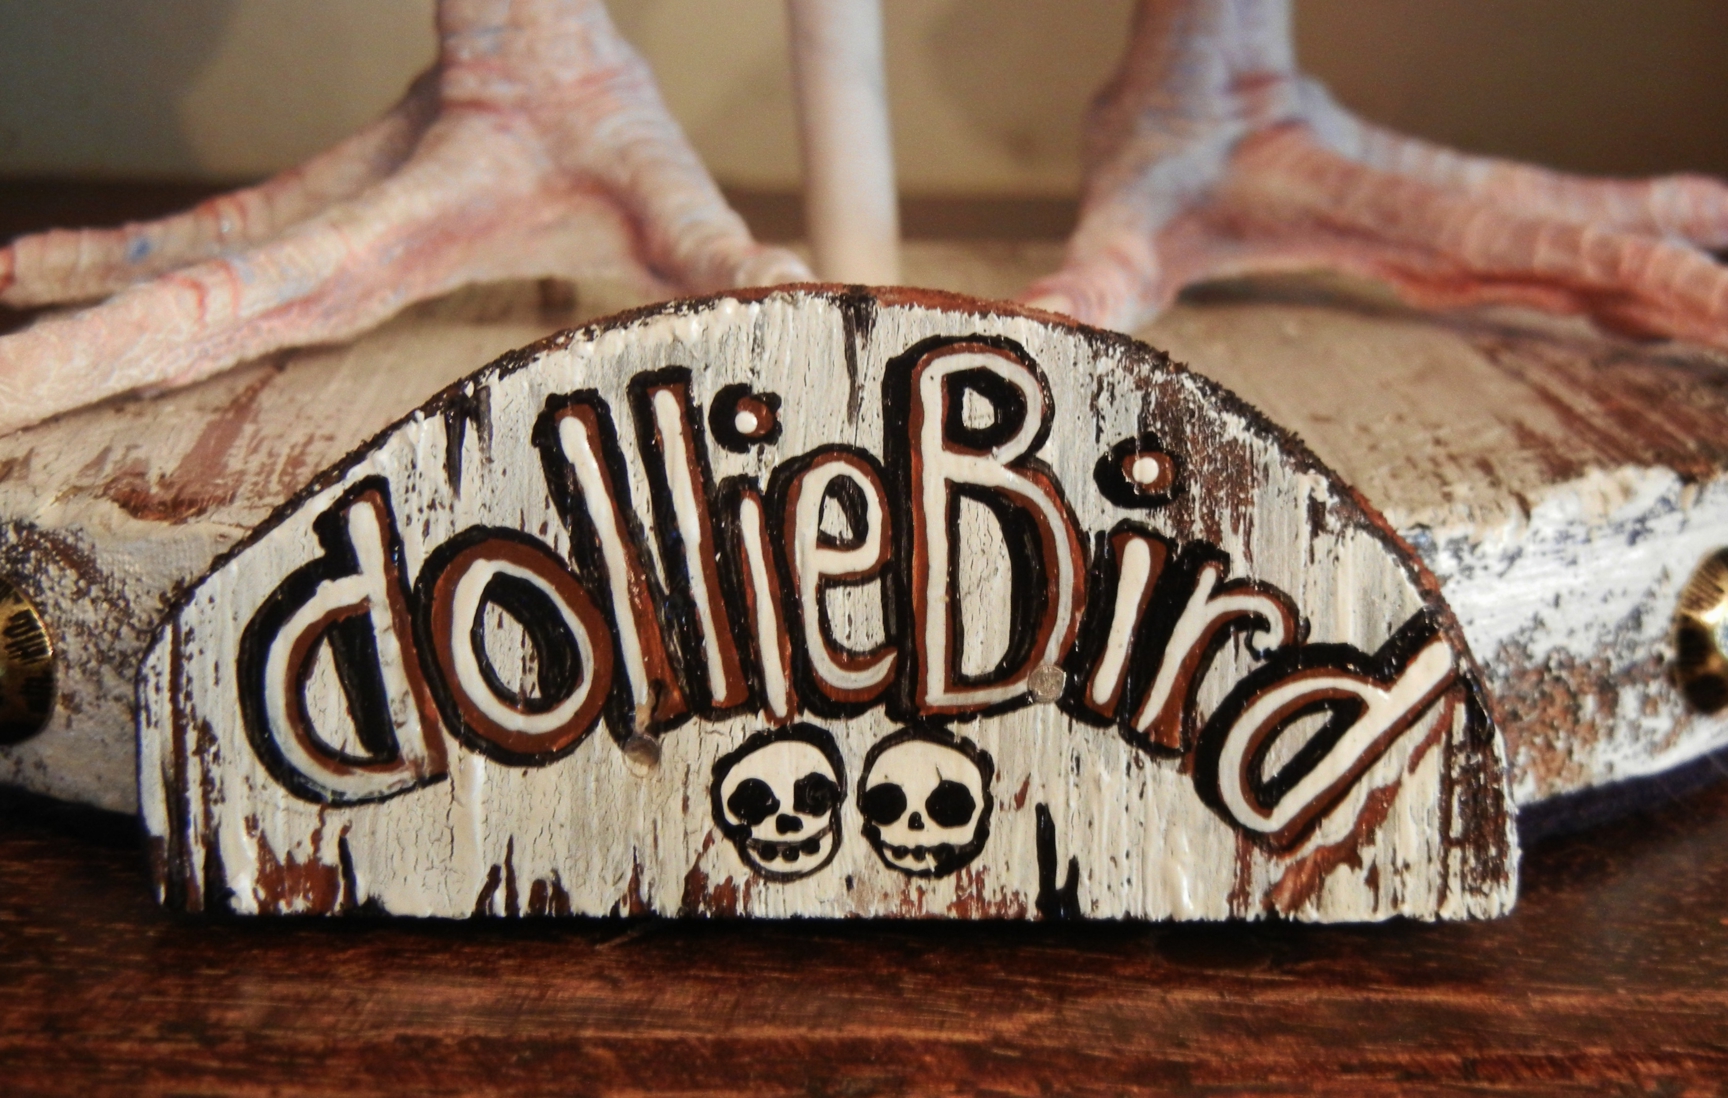 hand painted lettered wooden sign reads DollieBird with two tiny skulls